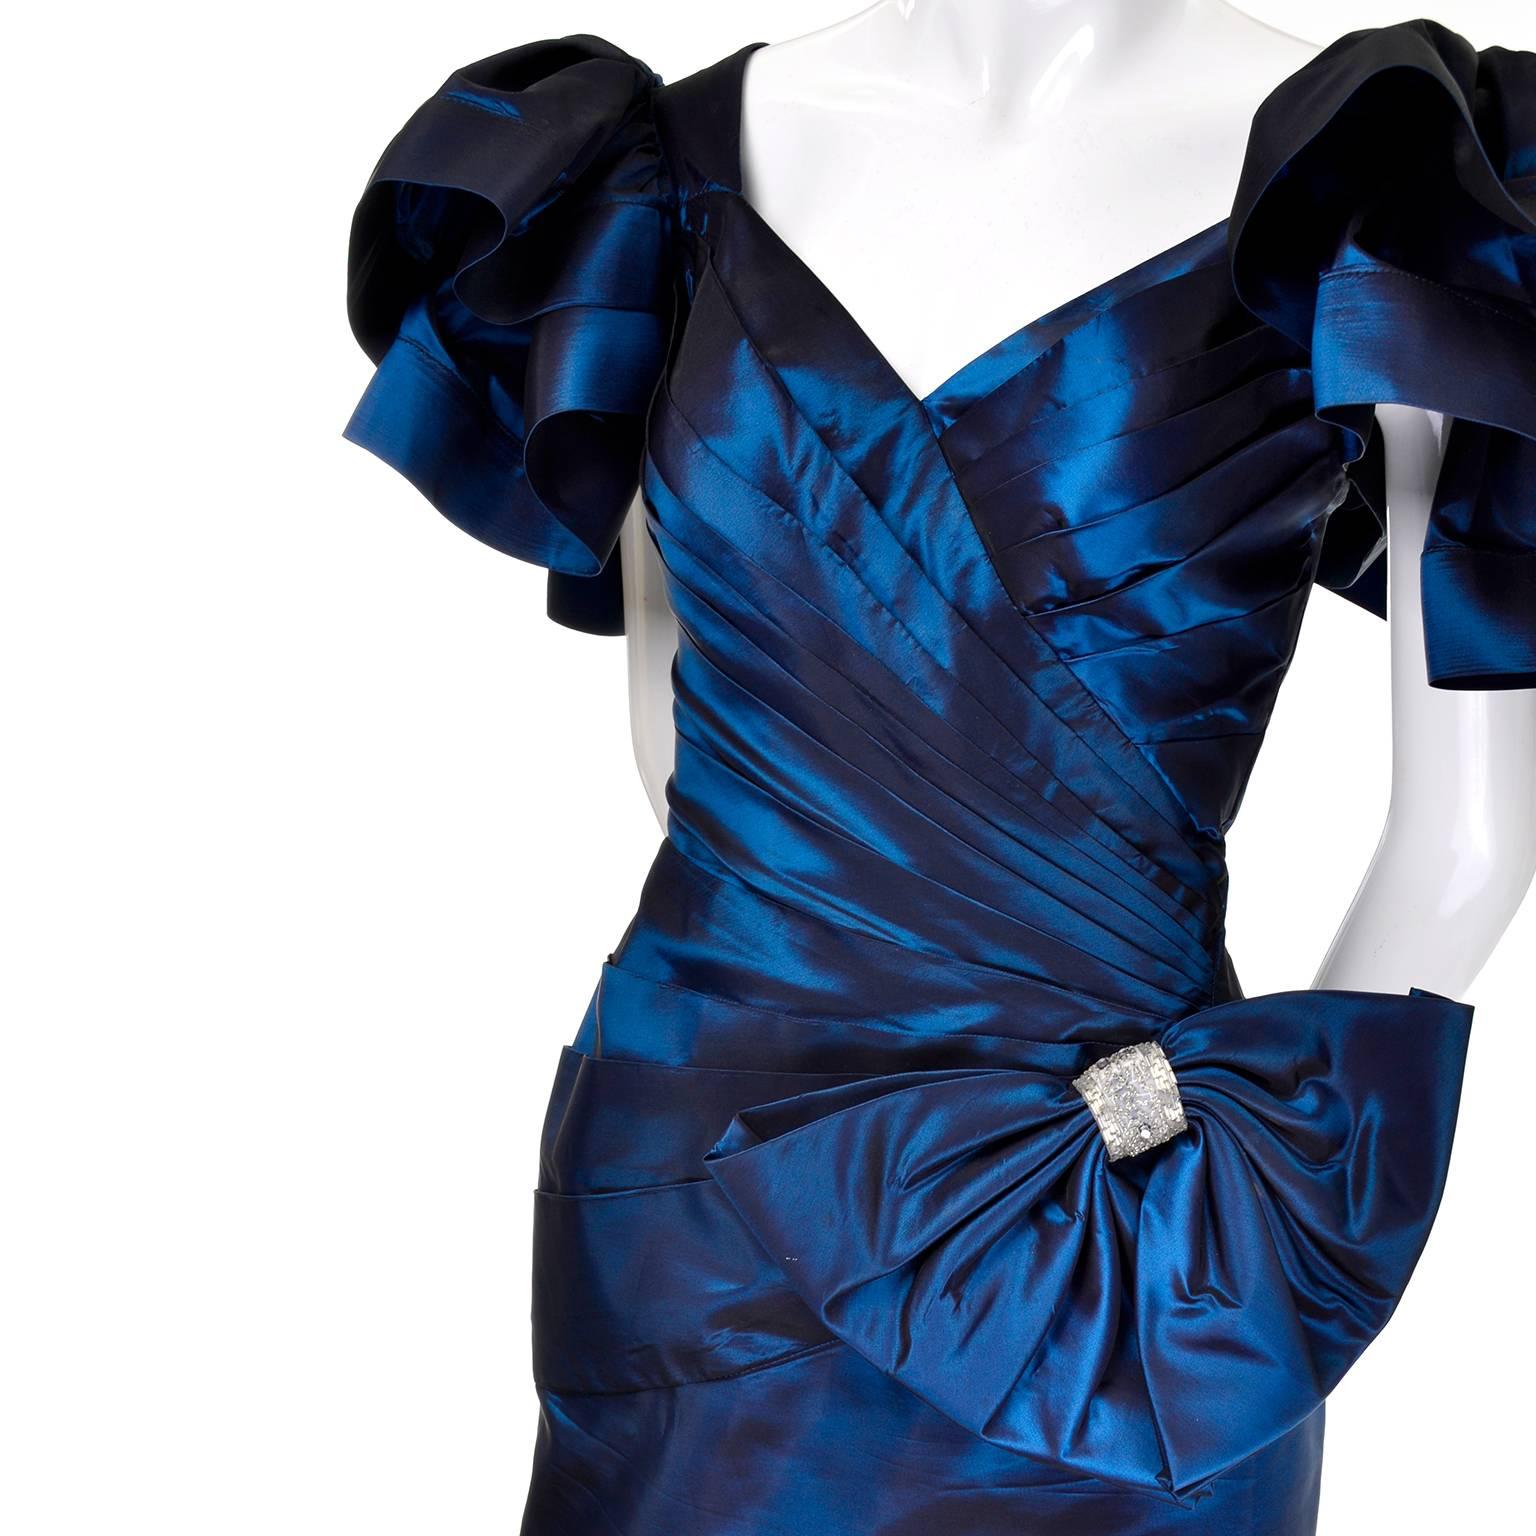 This is a beautiful vintage 1980's Tadashi iridescent blue dress with a side bow embellished with beading.  The dramatic statement sleeves are ruffled and the front is beautifully pleated and draped. The dress fits like a size 6 but please use the